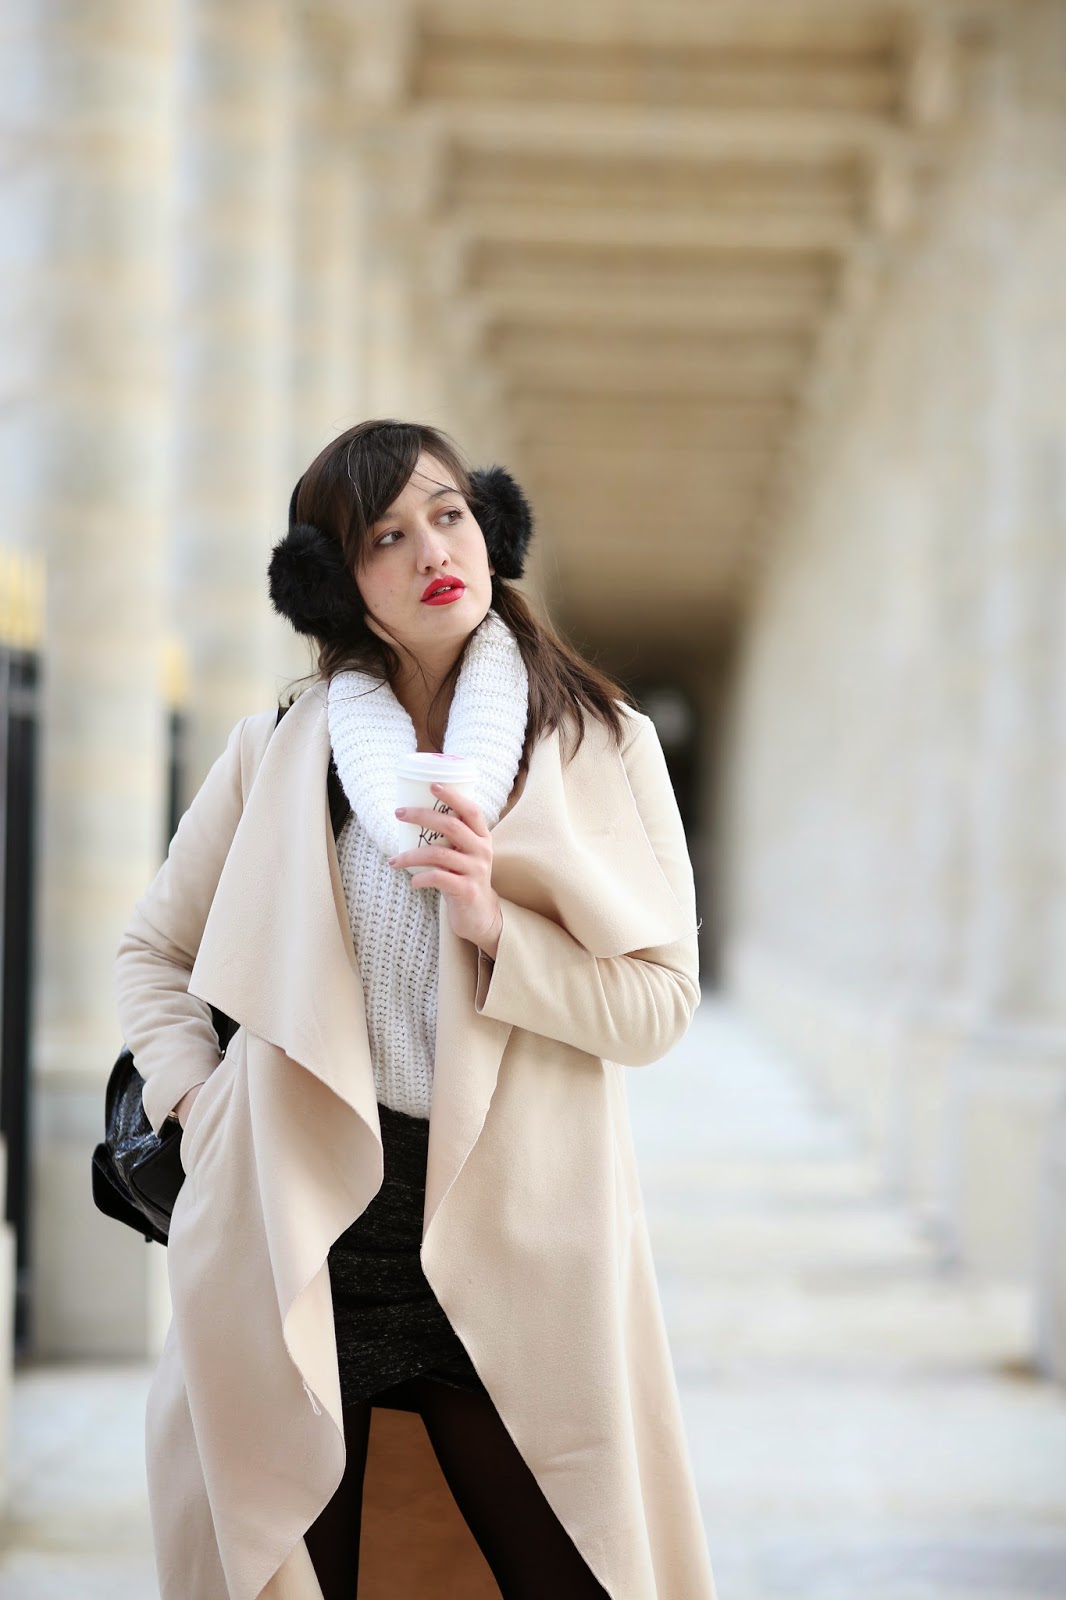 Meet Me In Paree: Wrapped Up